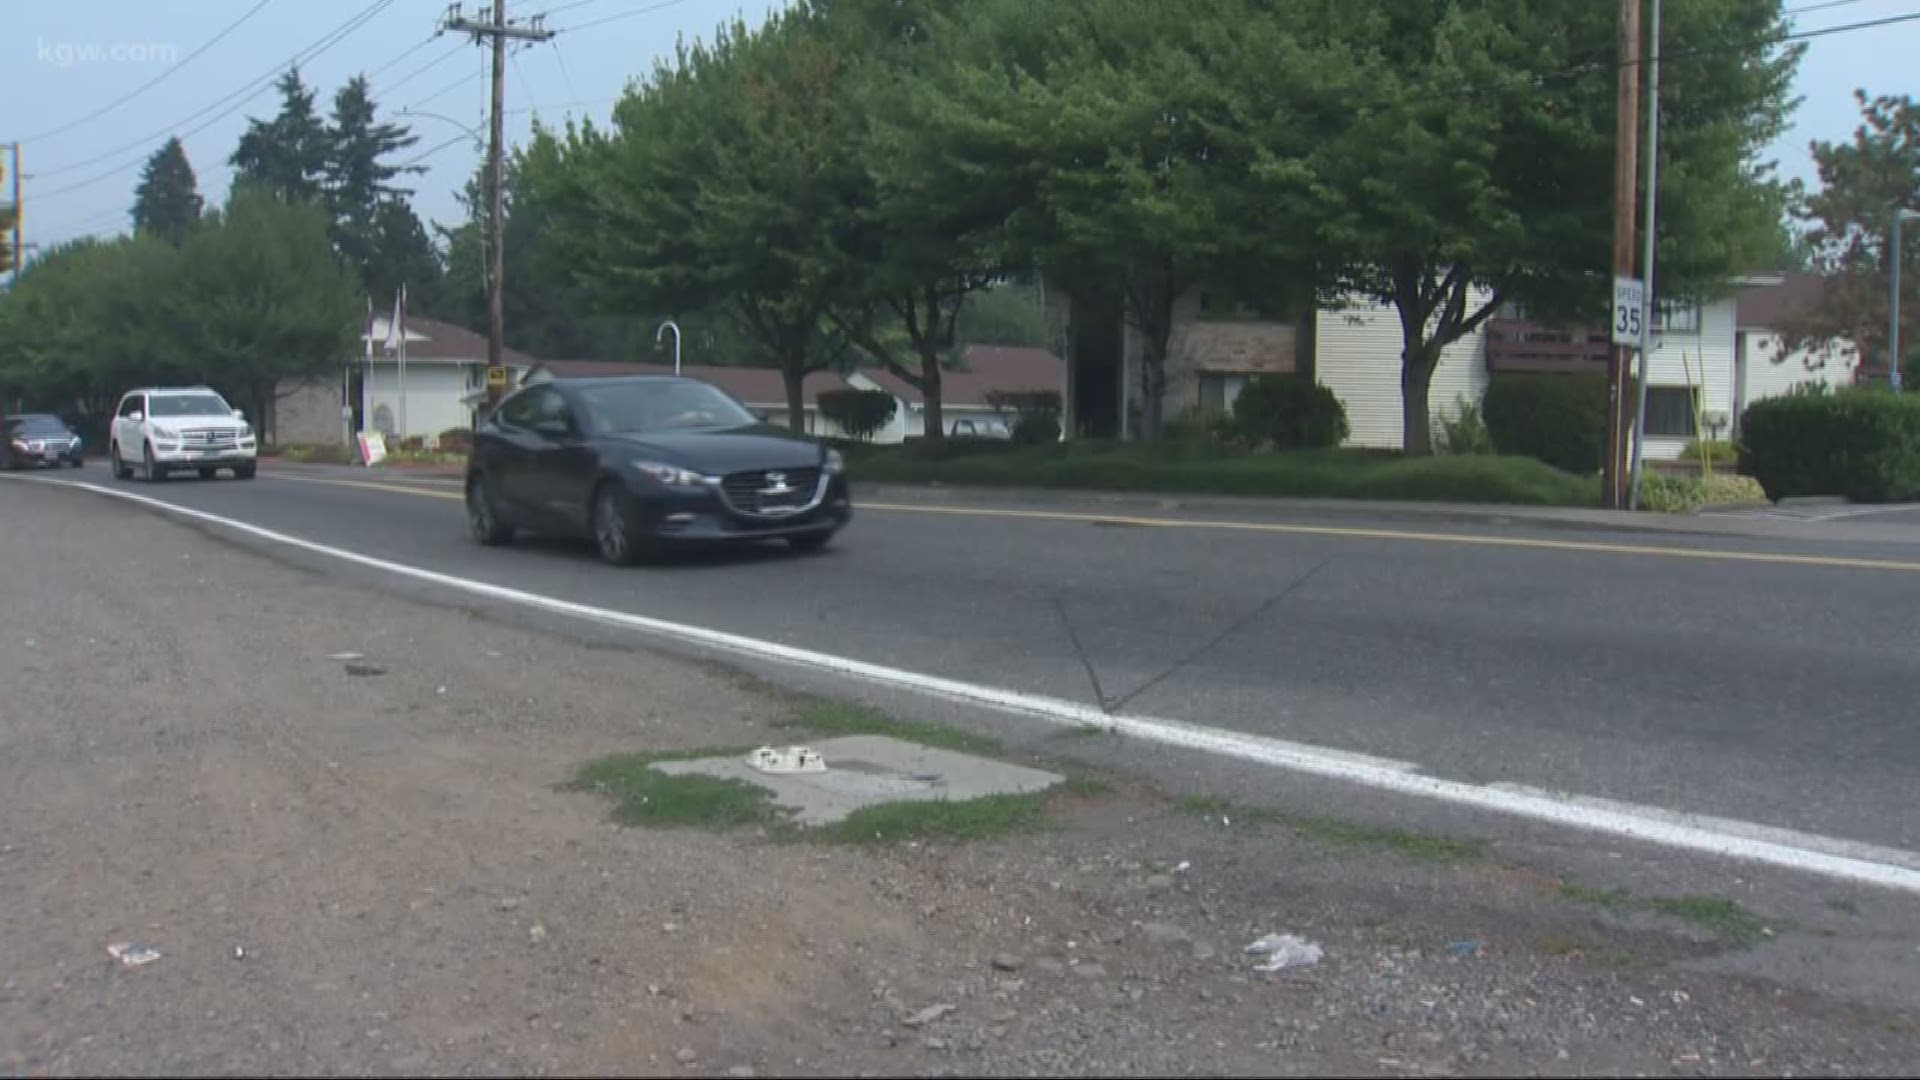 Parents in the Centennial neighborhood want the city to install sidewalks to keep children safe. The city agrees. Now, where is the money?